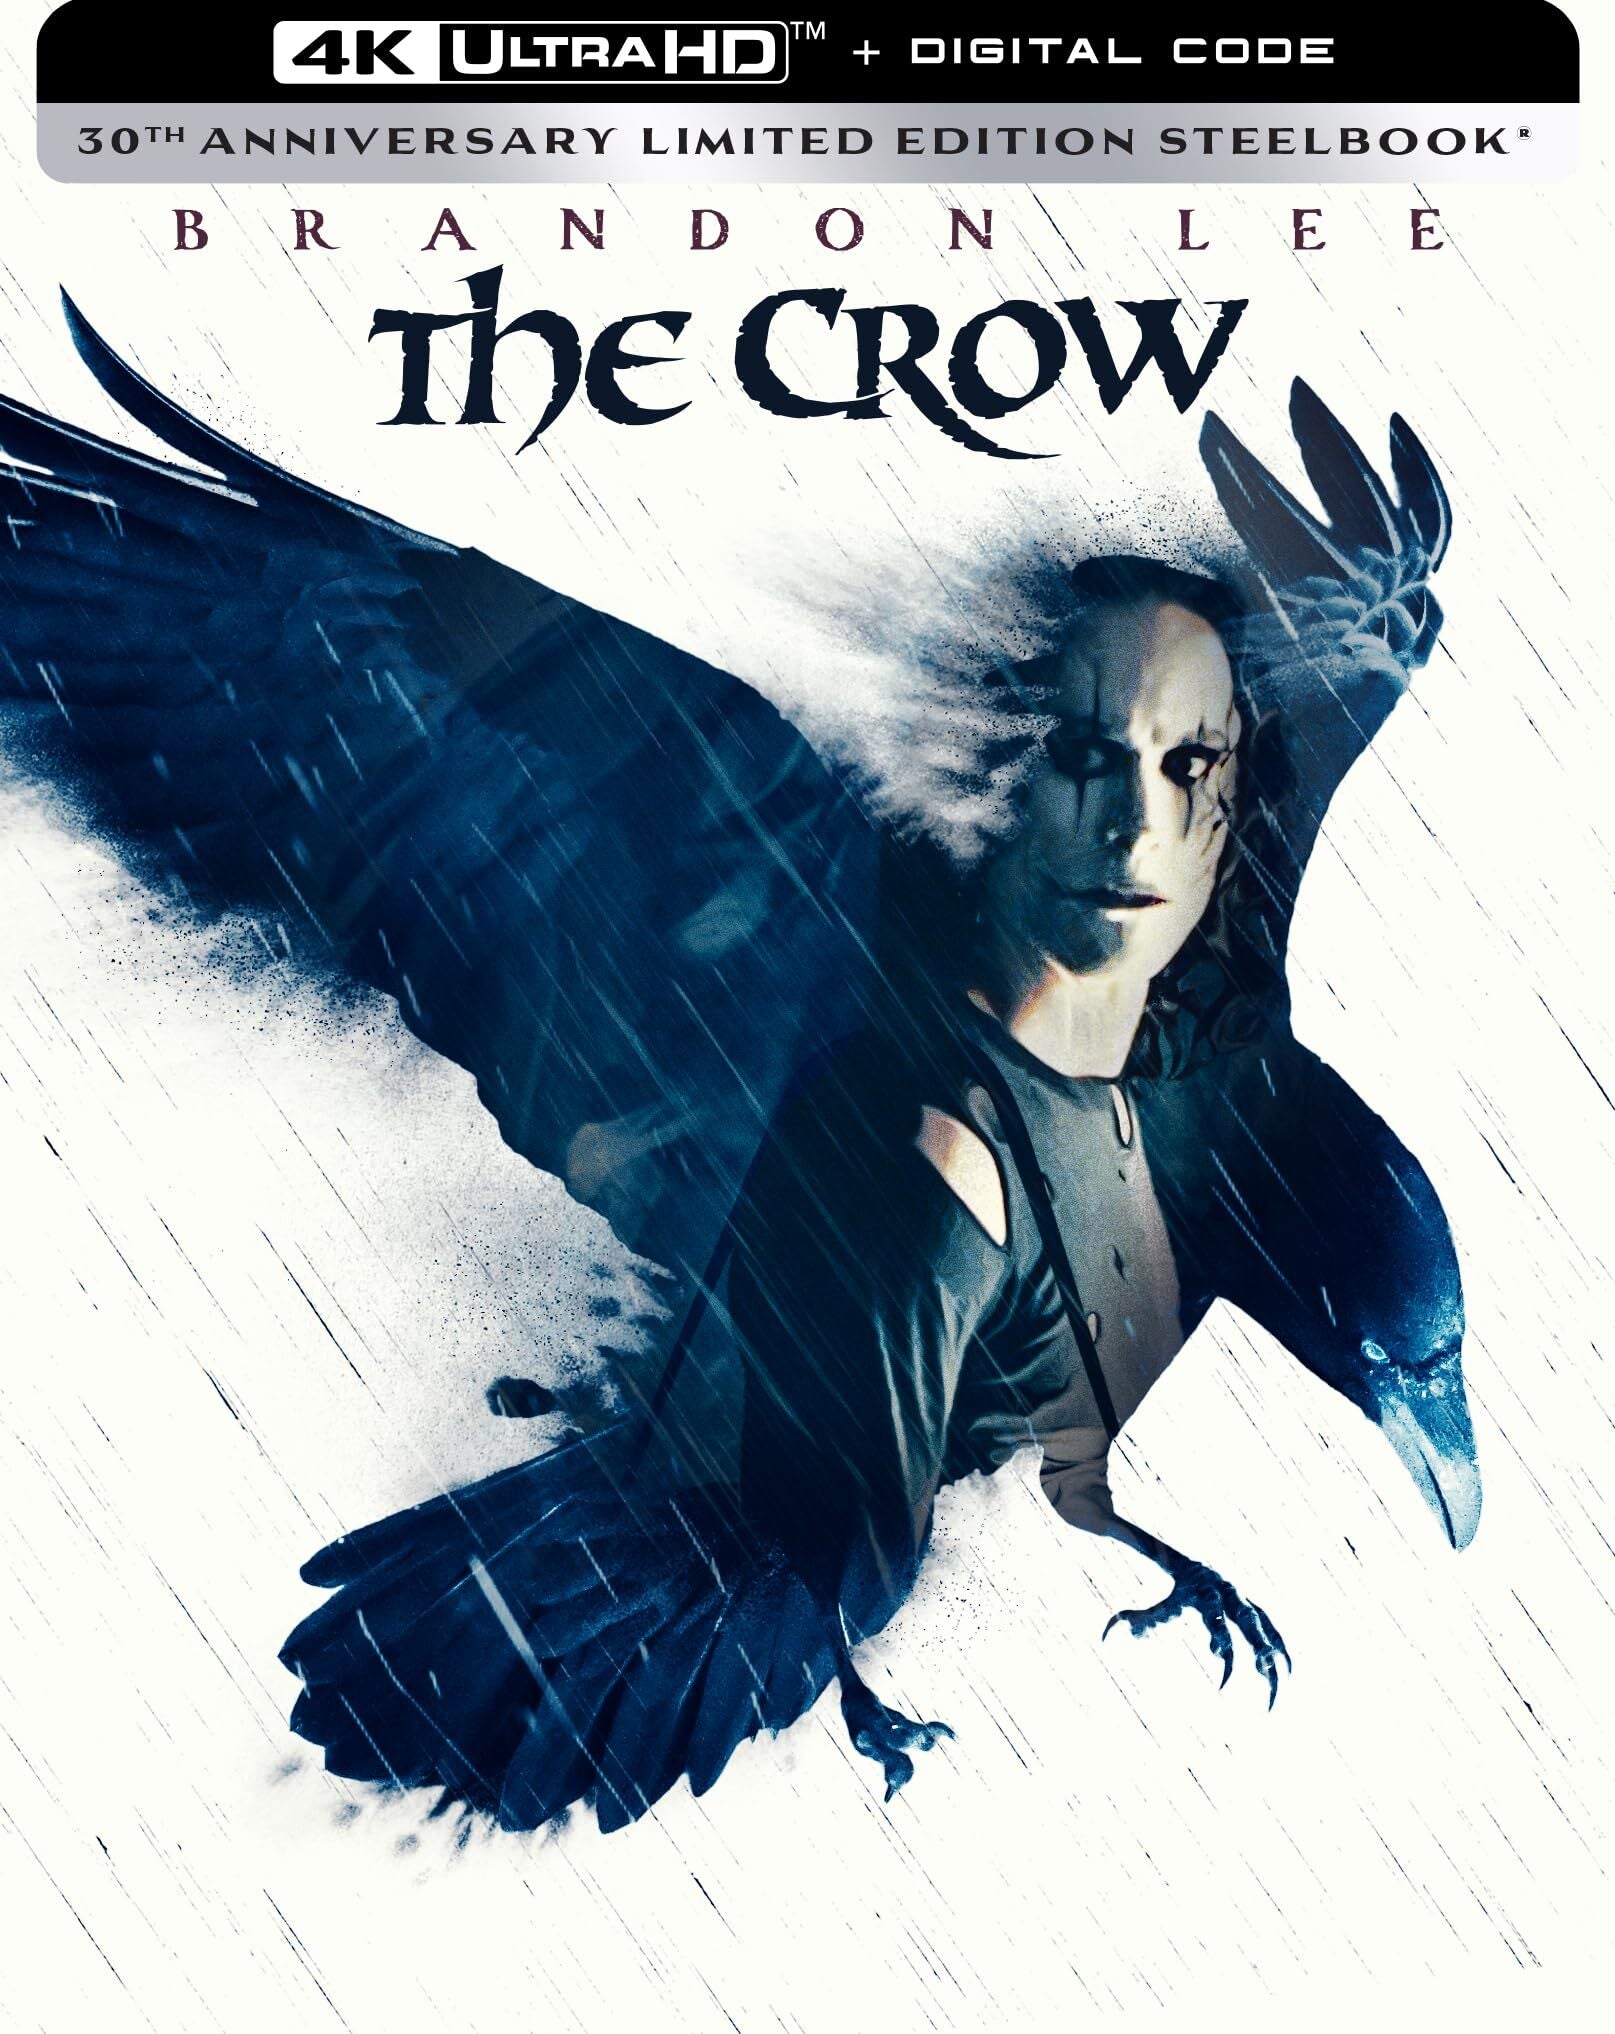 THE CROW (LIMITED EDITION) 4K UHD STEELBOOK